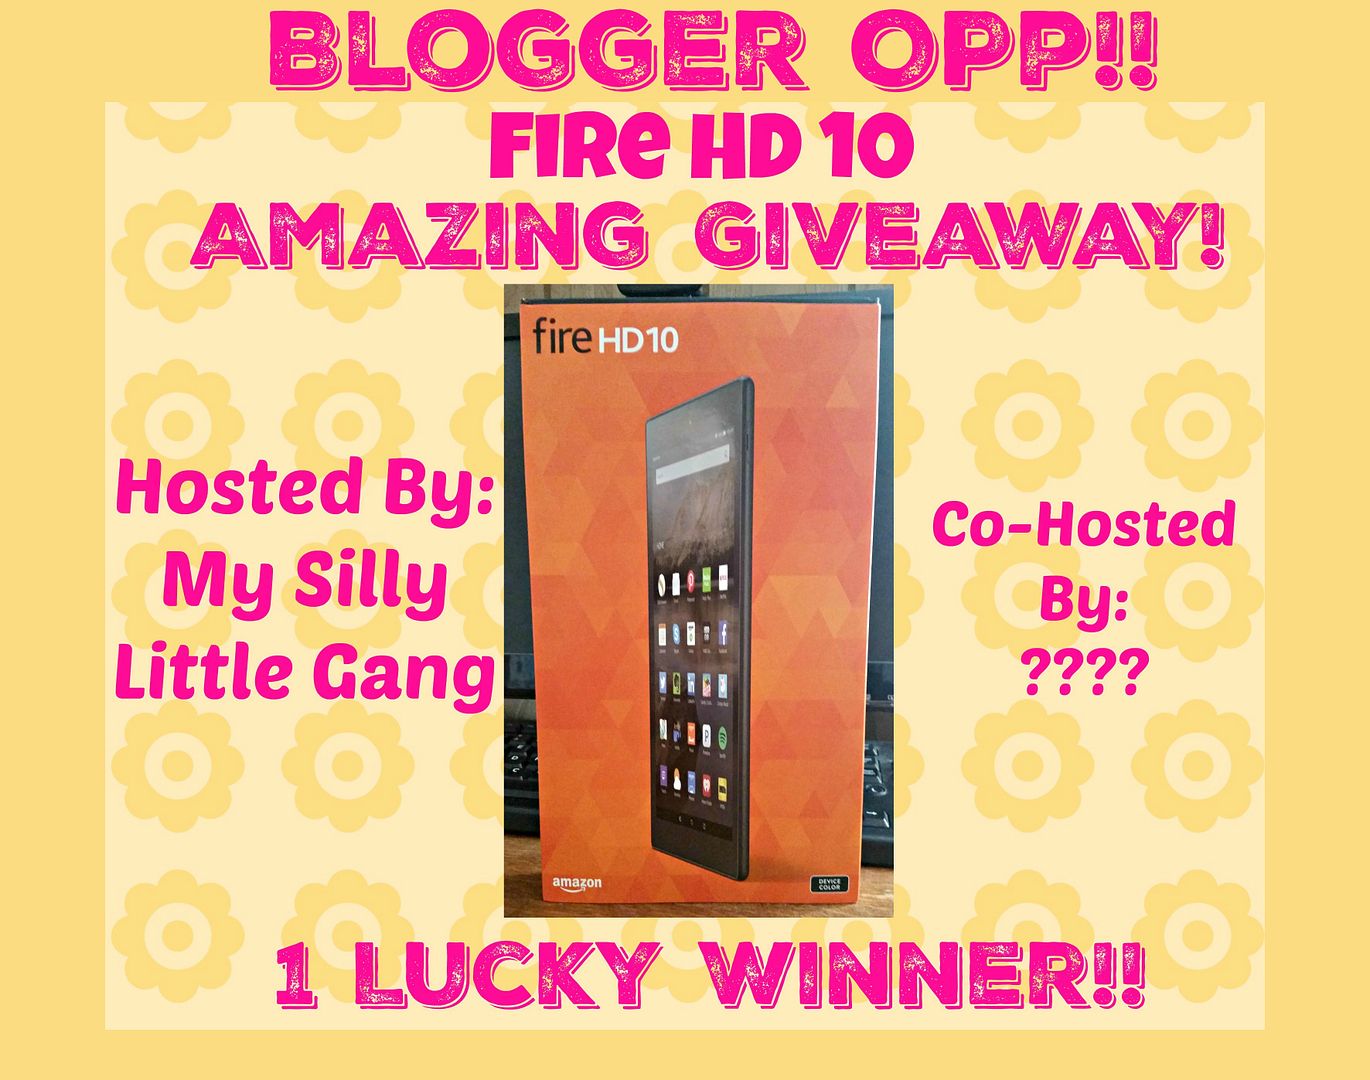 Blogger Opp Amazing Fire HD 10 Giveaway!